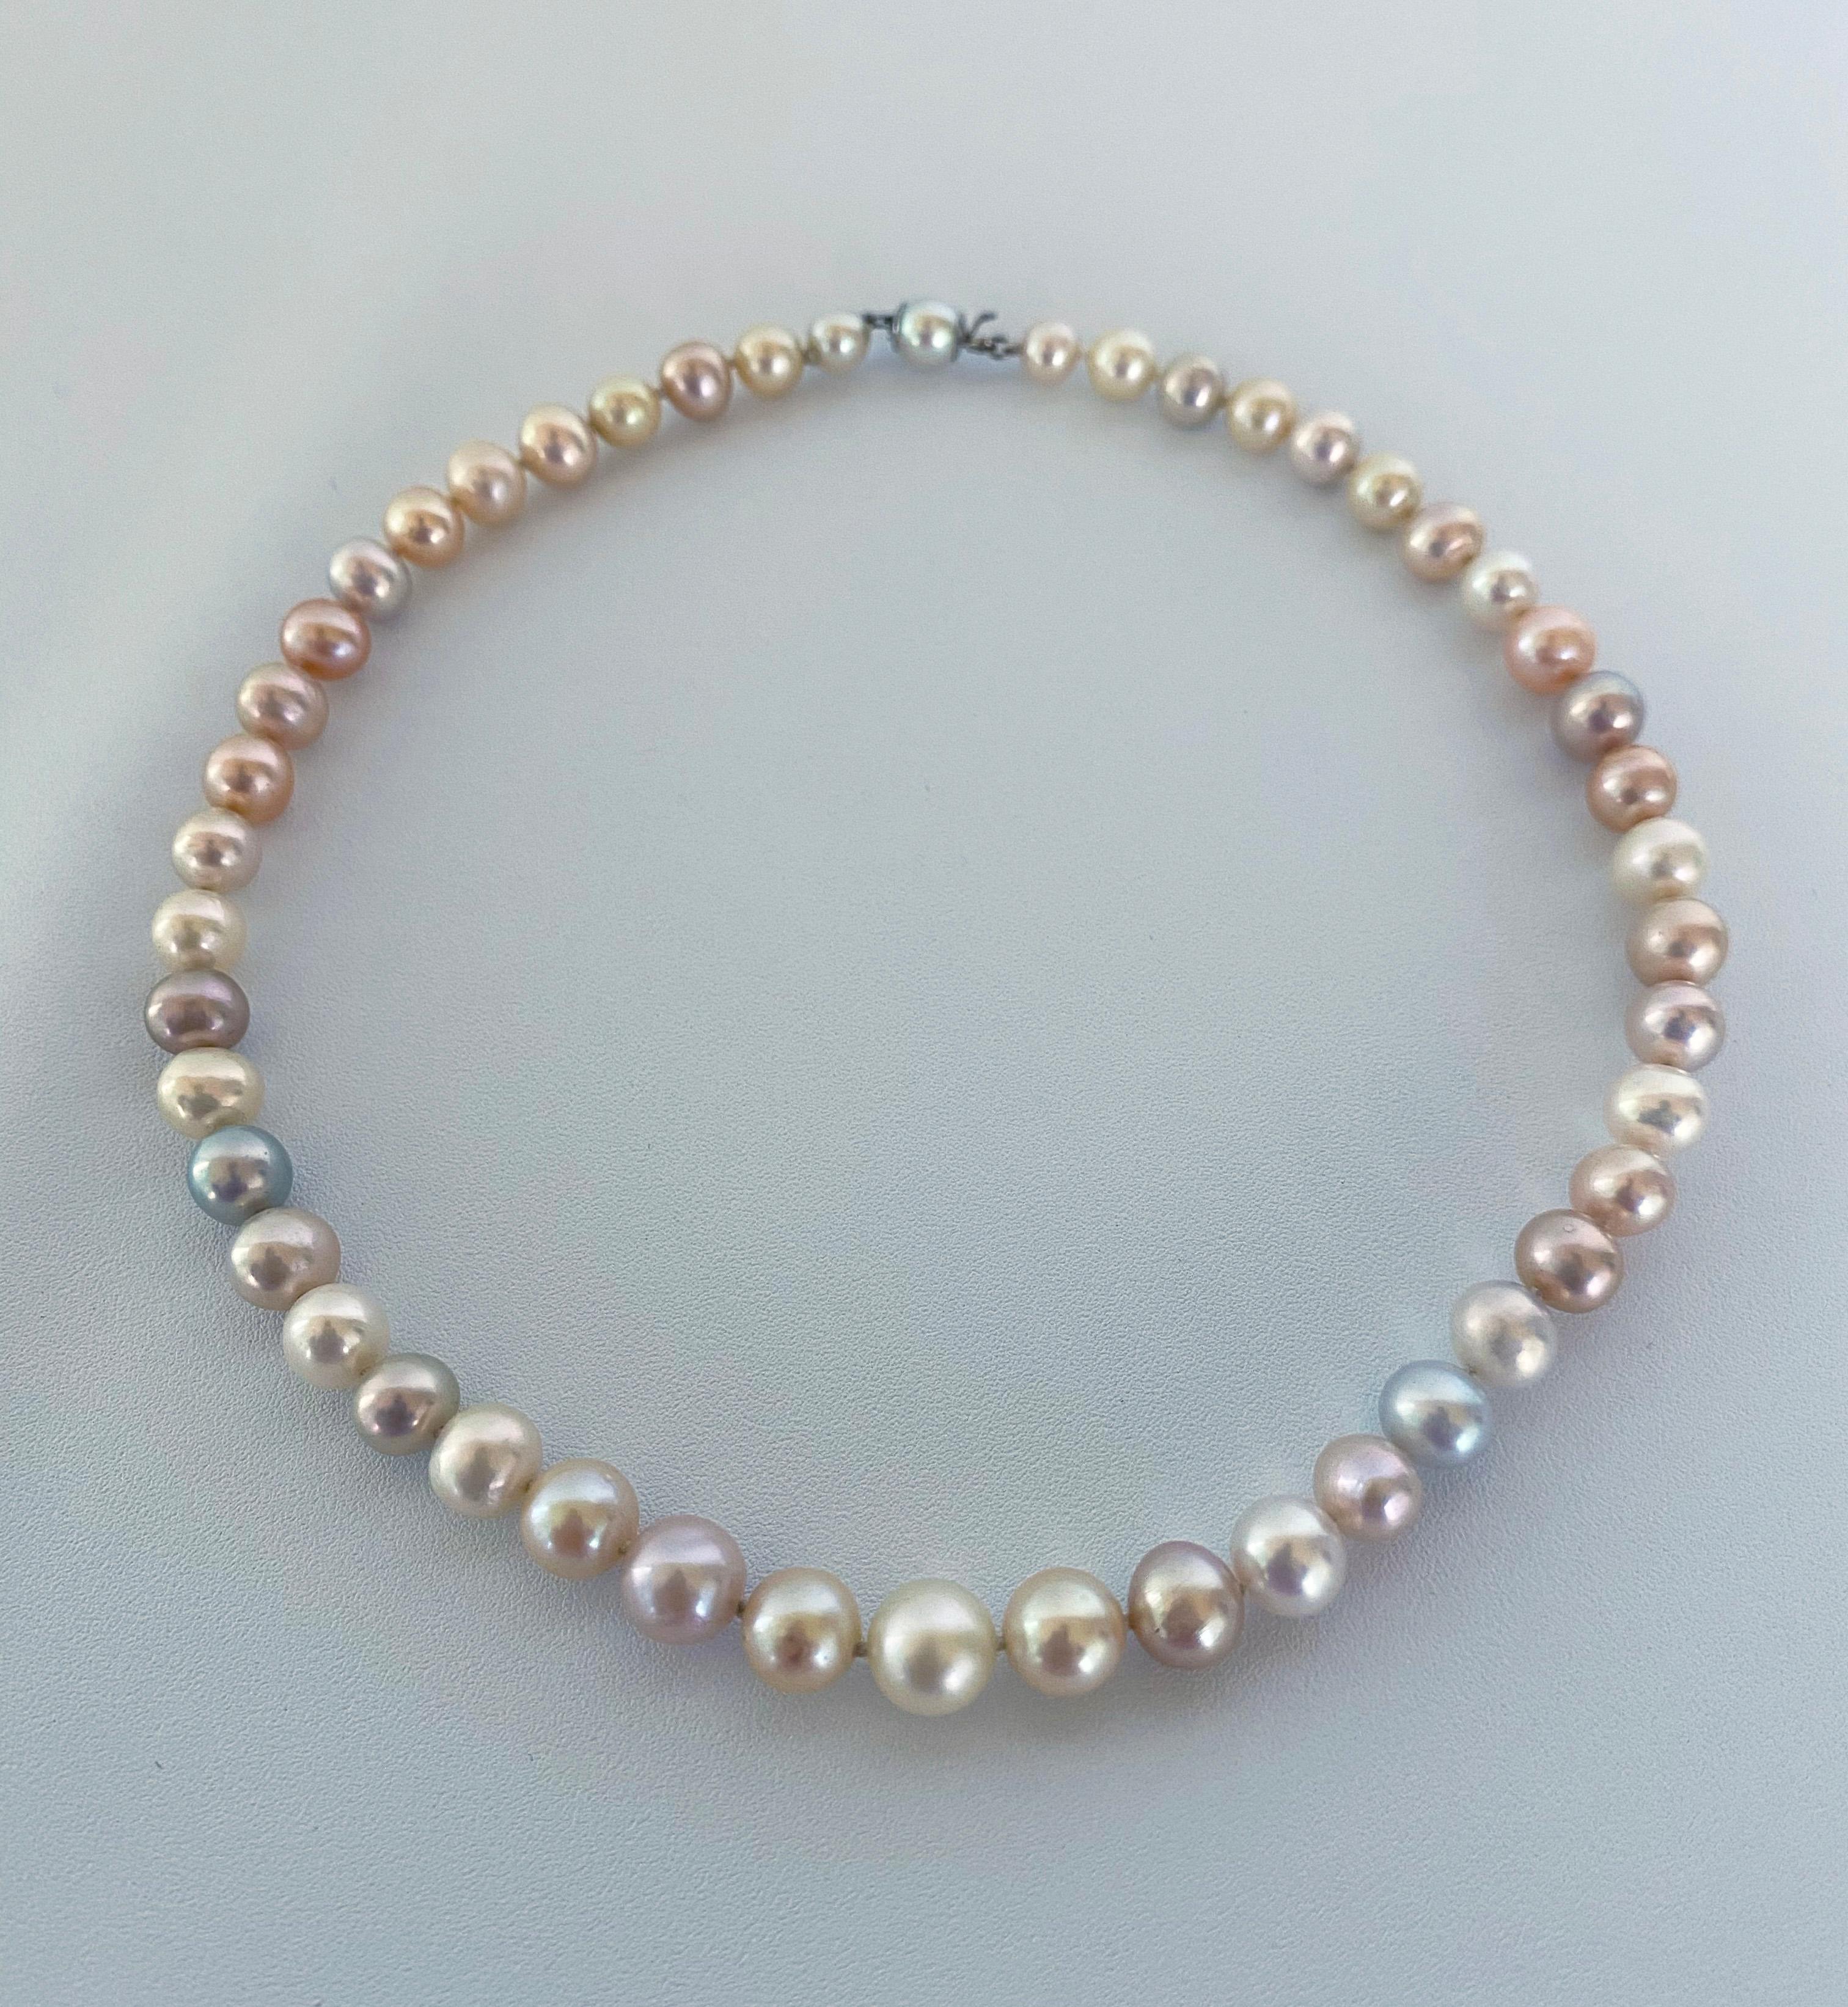 Bead Marina J. Multi Colored Pearl Necklace with 14k White Gold Clasp For Sale